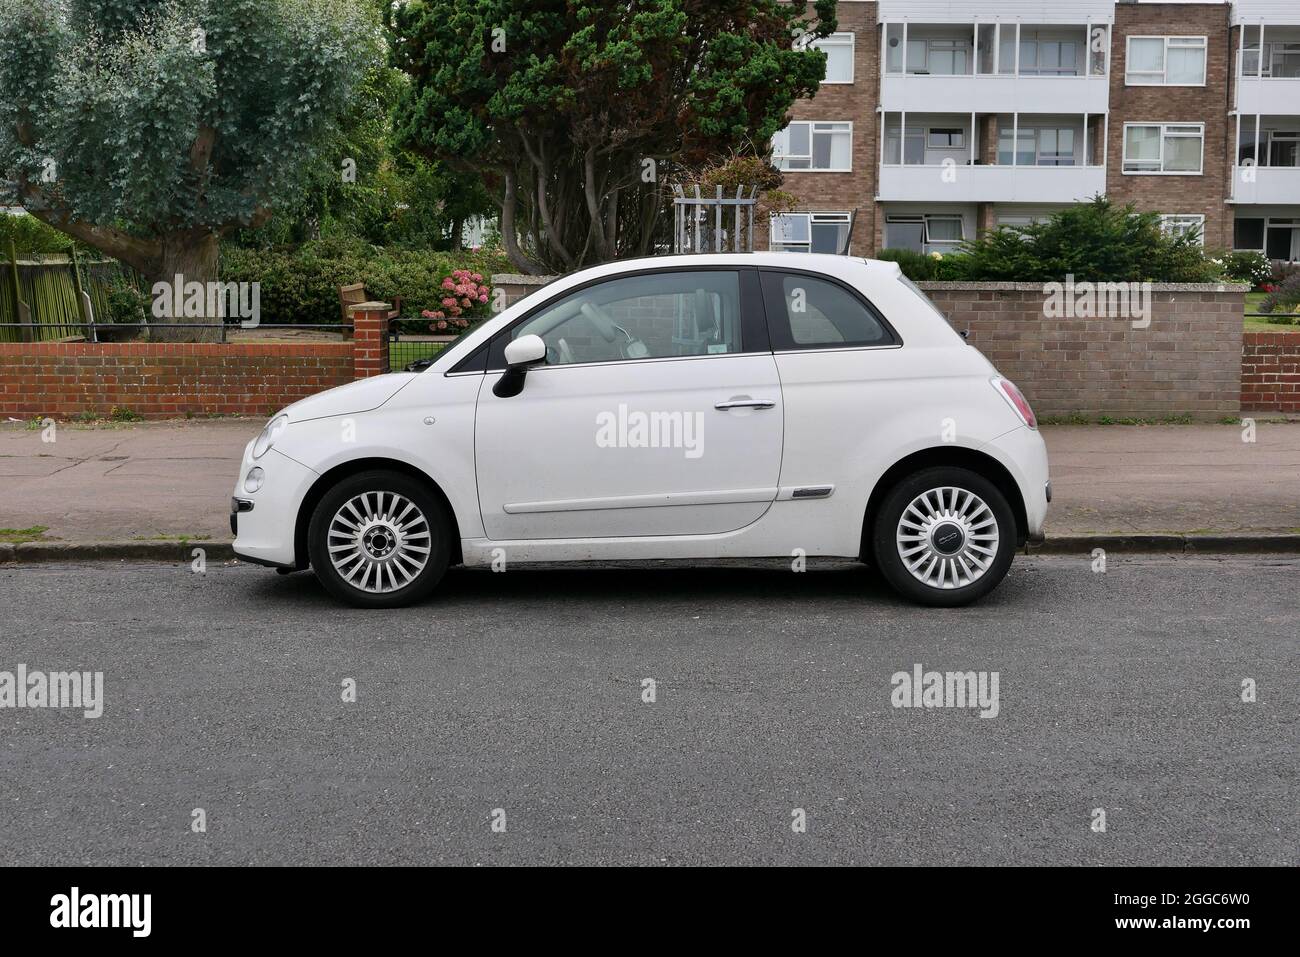 30 August 2021 - Essex, UK: White Fiat 500 parked in road in front of apartments Stock Photo